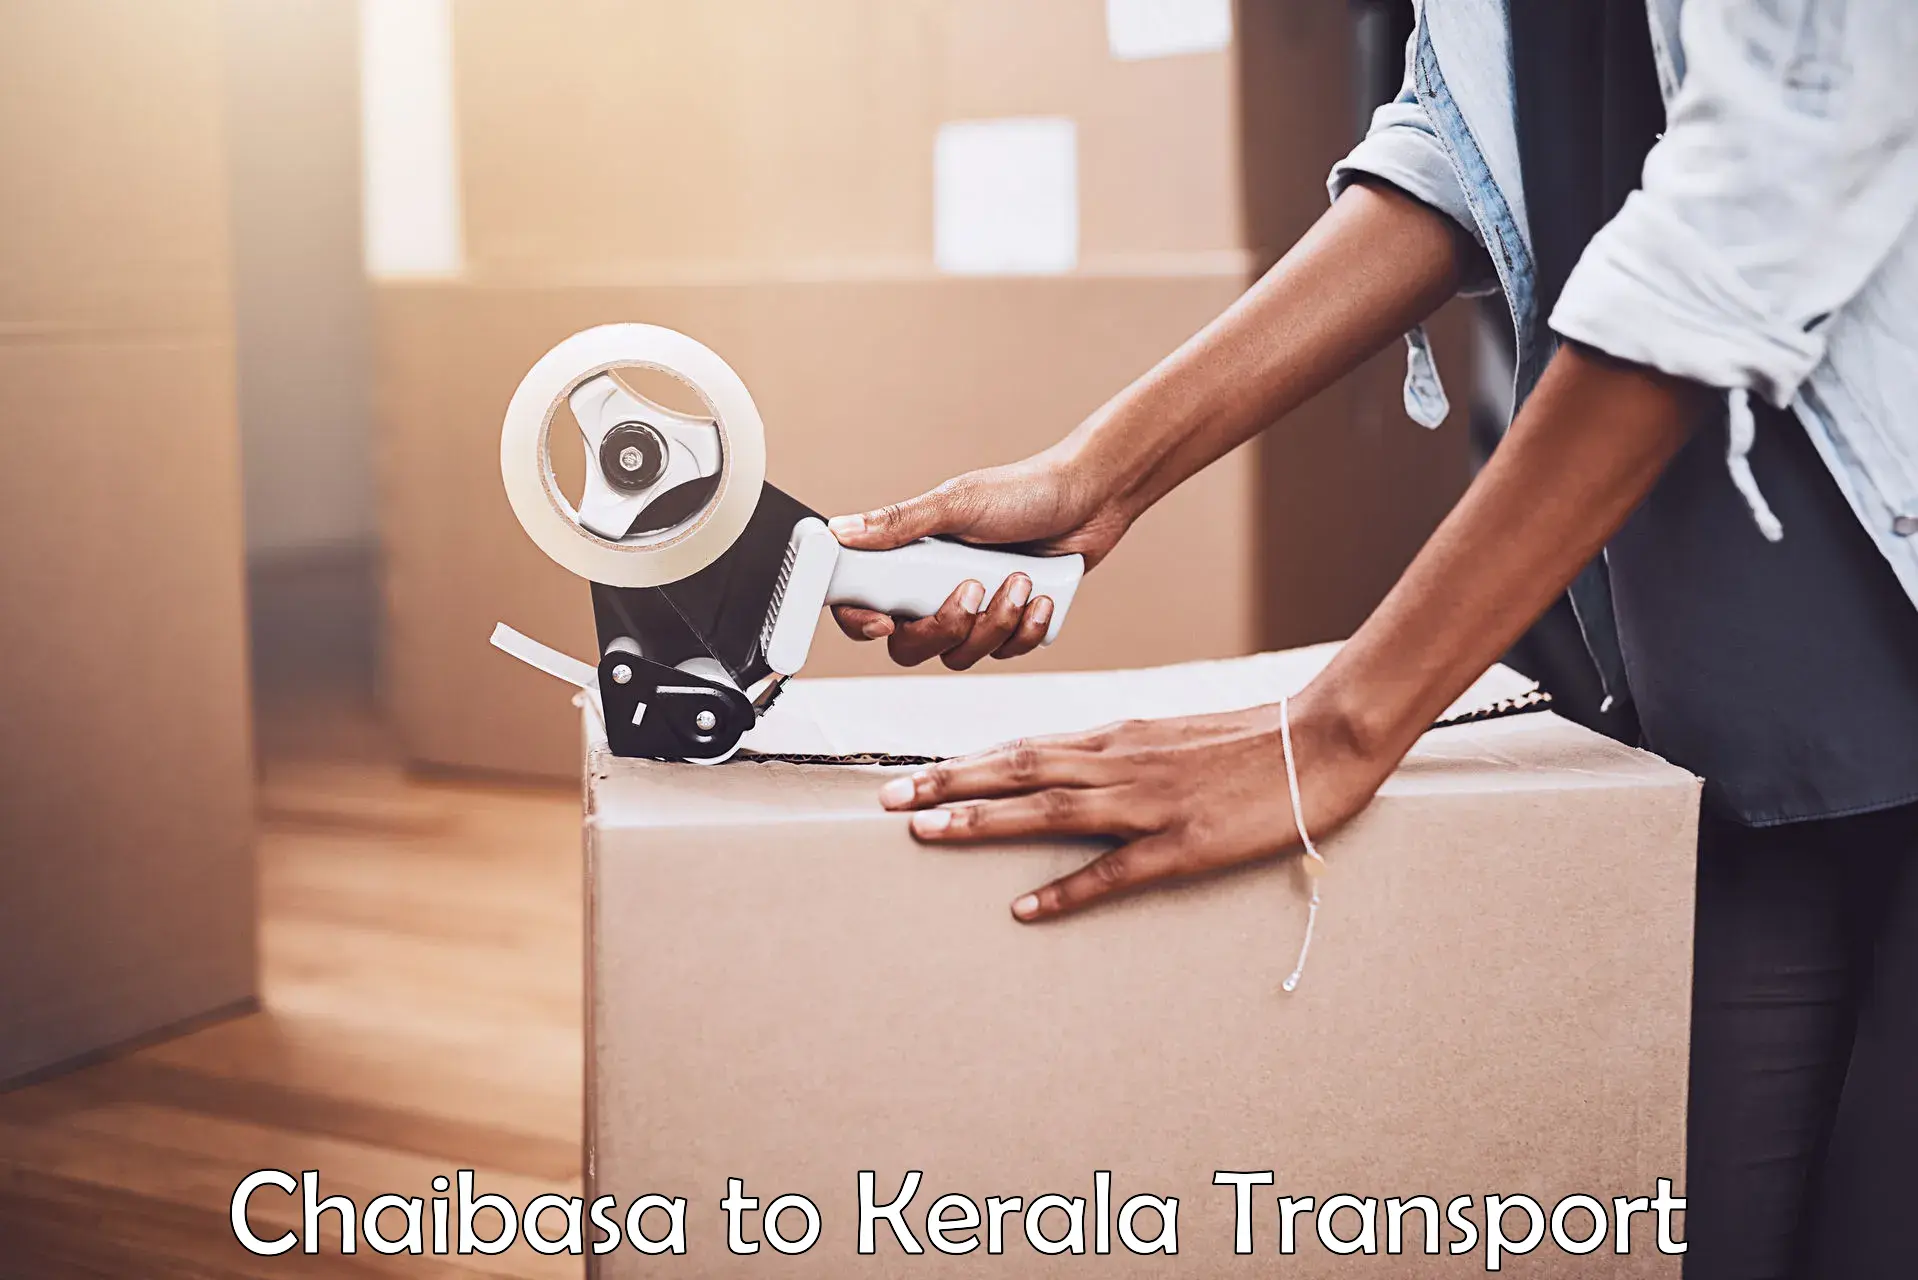 Container transport service Chaibasa to Kerala